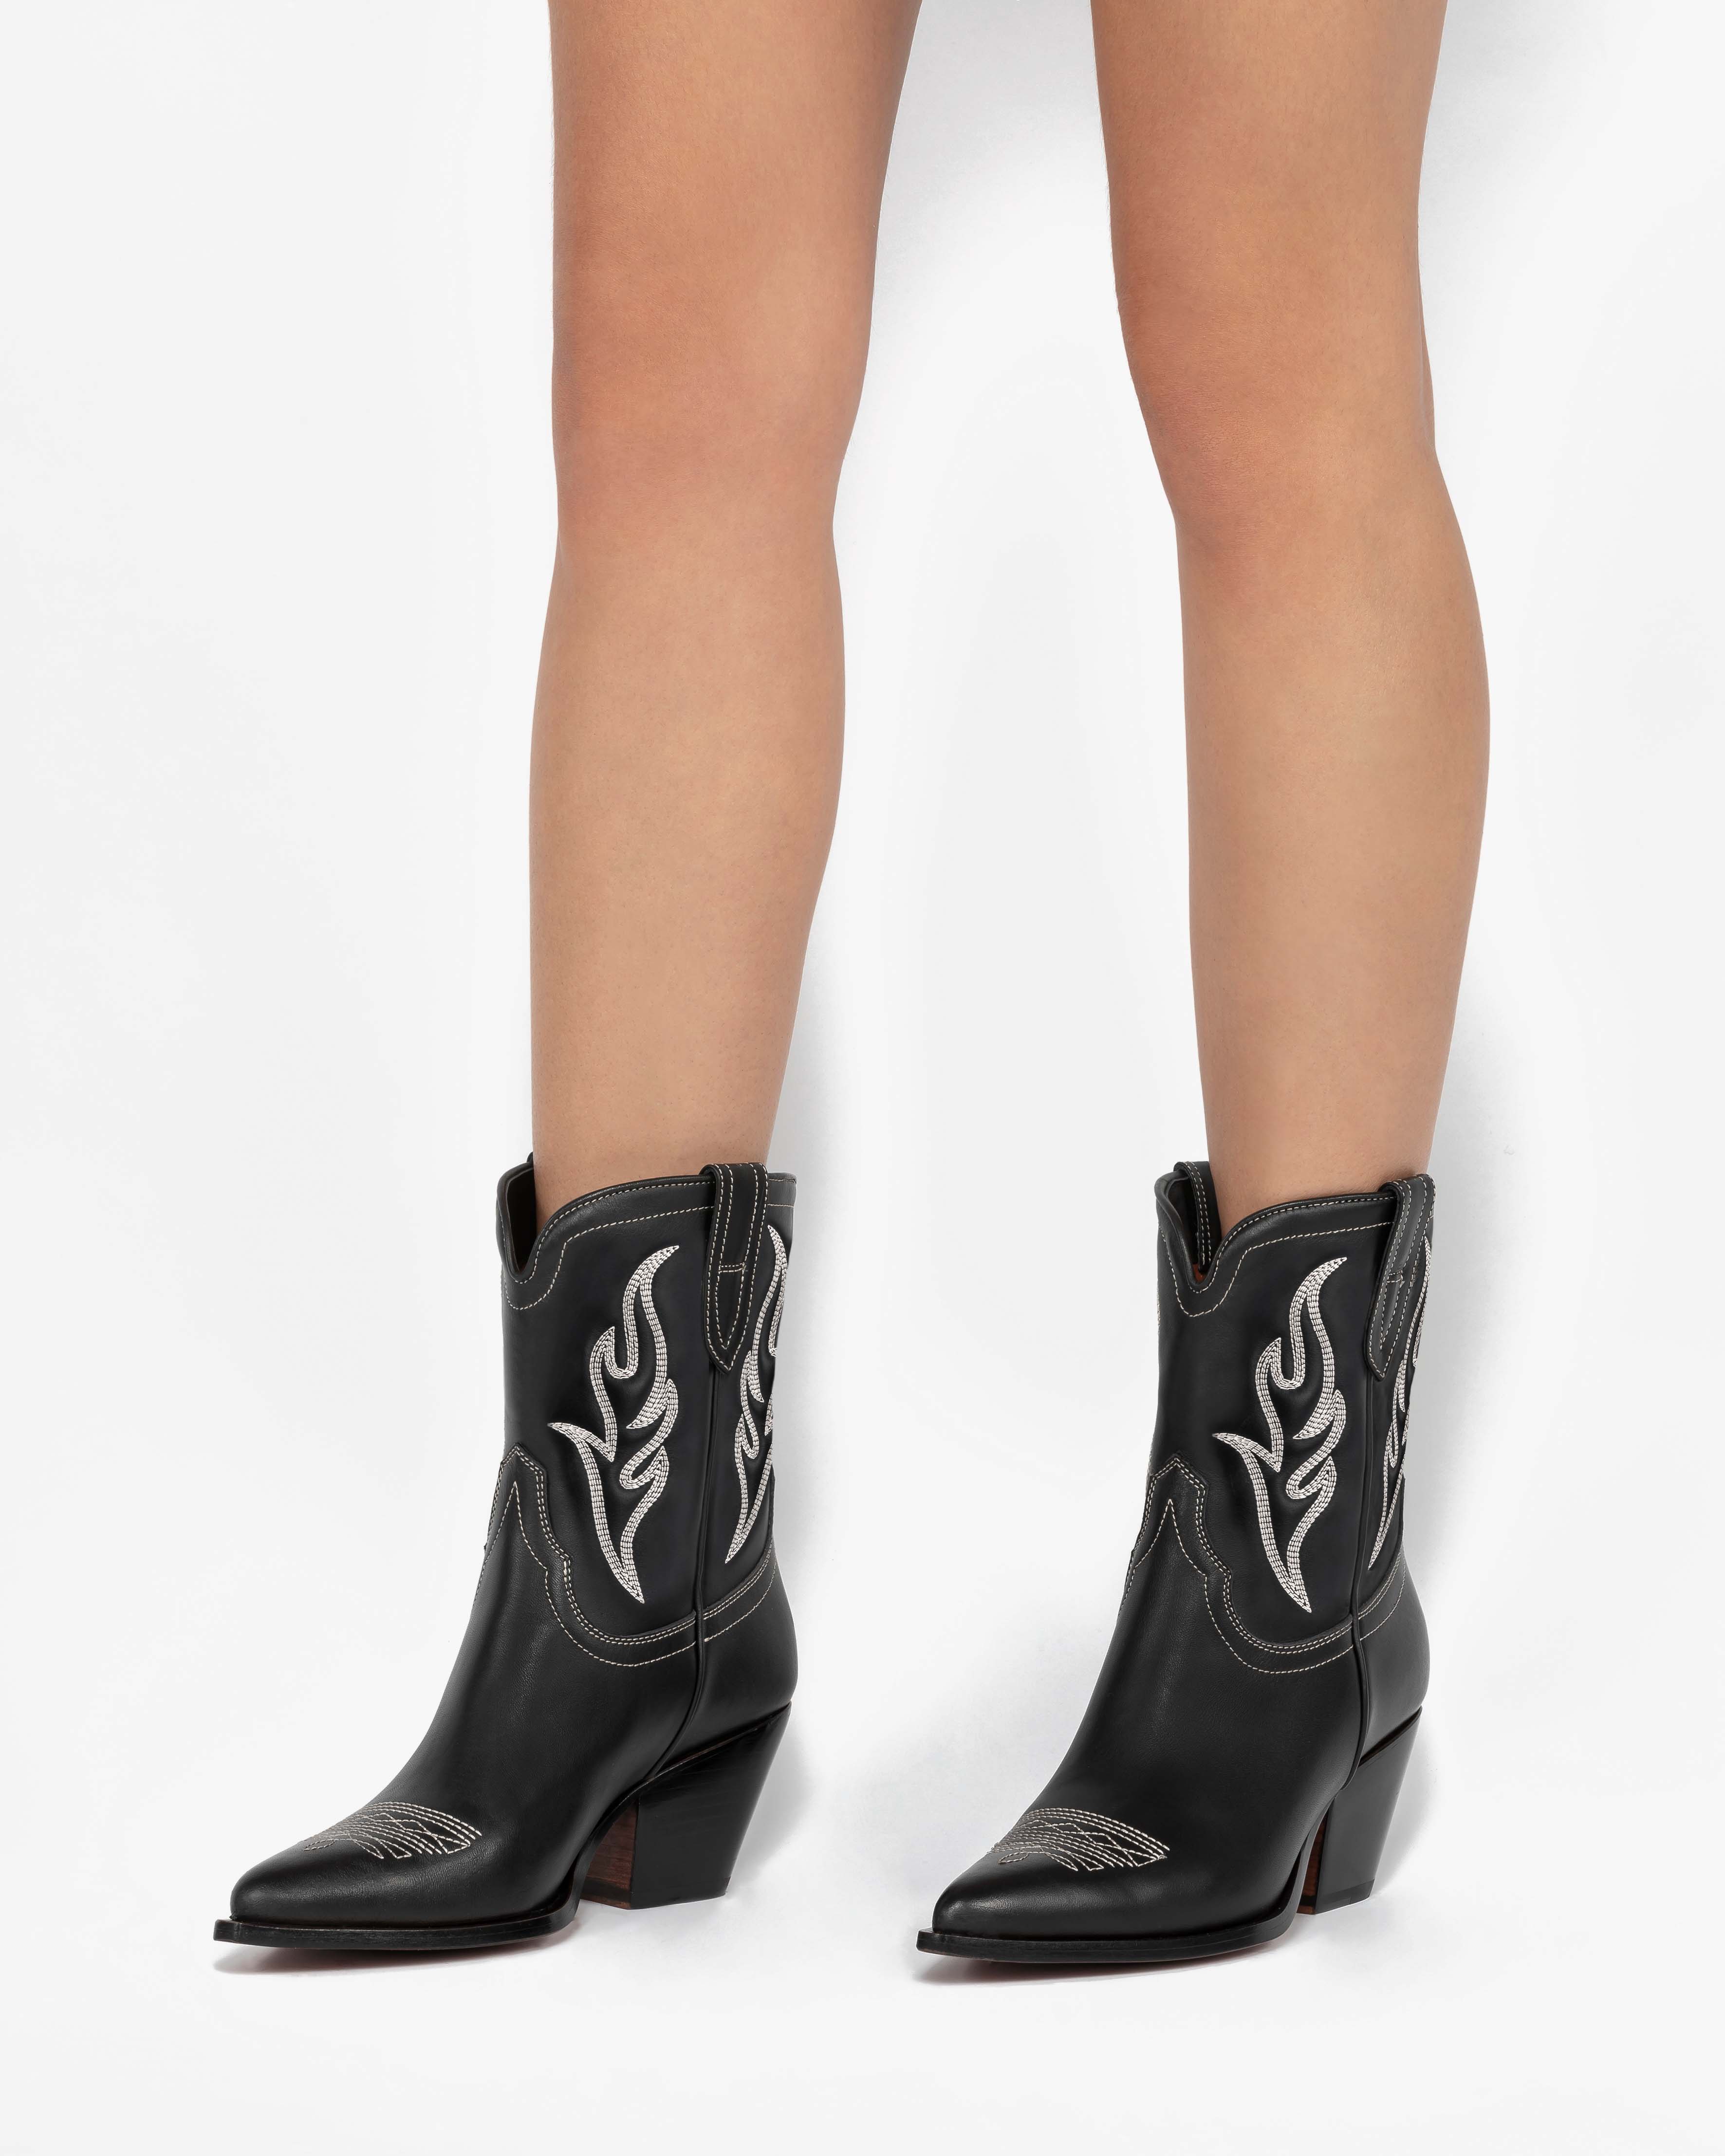 PERLA Women's Ankle Boots in Black Calf Leather | Off-White Embroidery_Indossato_02